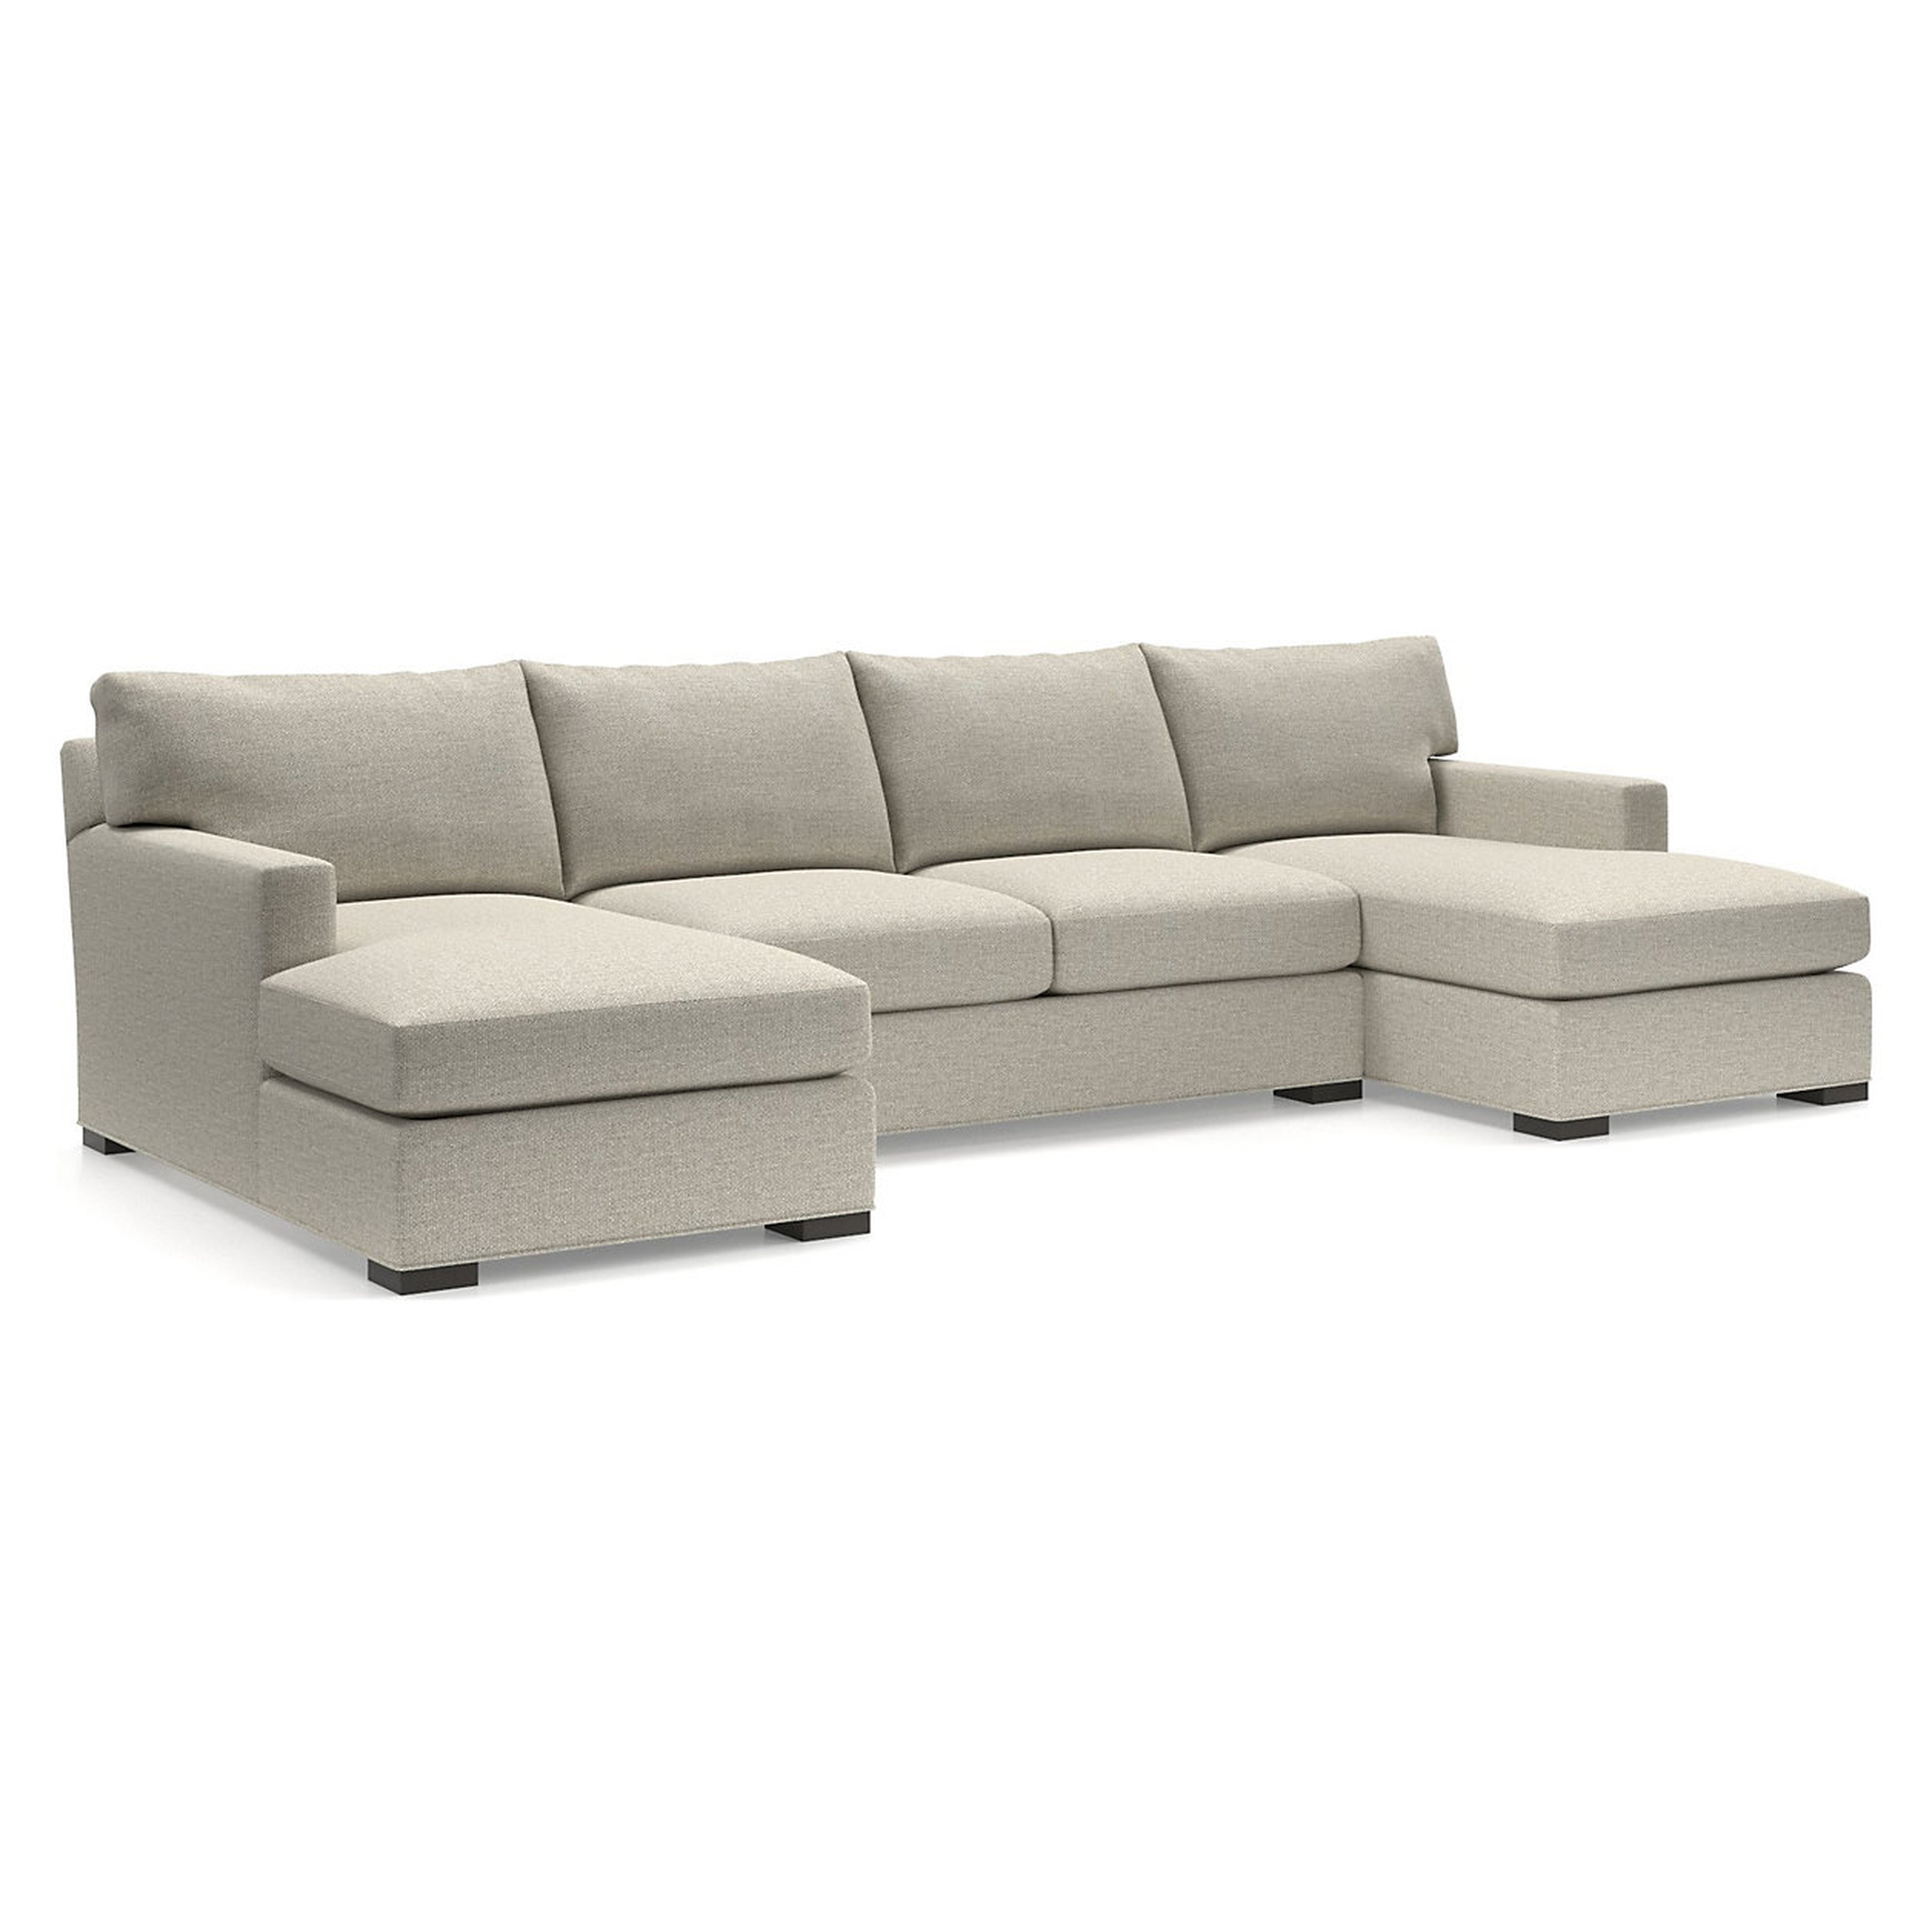 Axis 3-Piece Sectional - Crate and Barrel